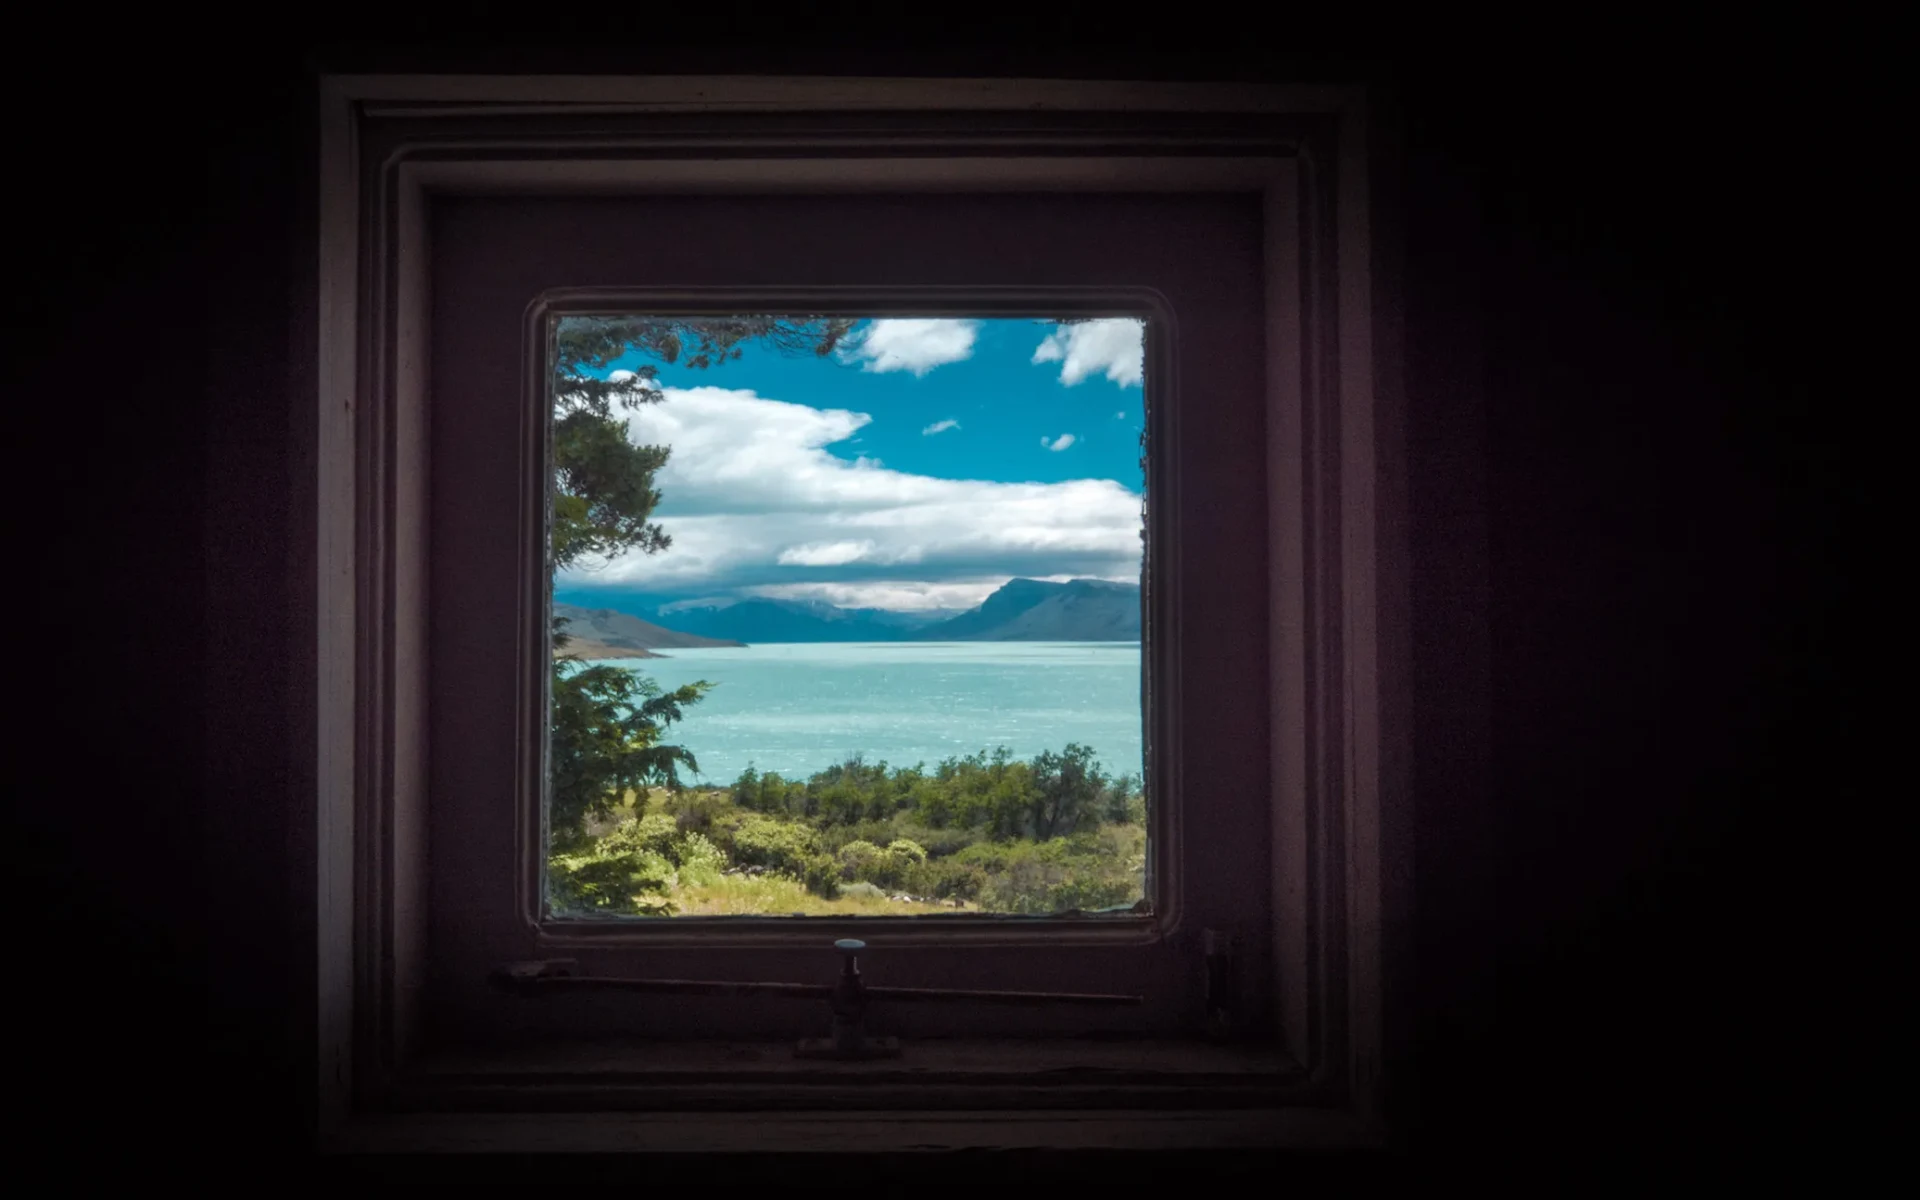 The bathroom window in the estancia looks out at a mesmerising view of Lake Argentino and the tumbling mountains behind it.